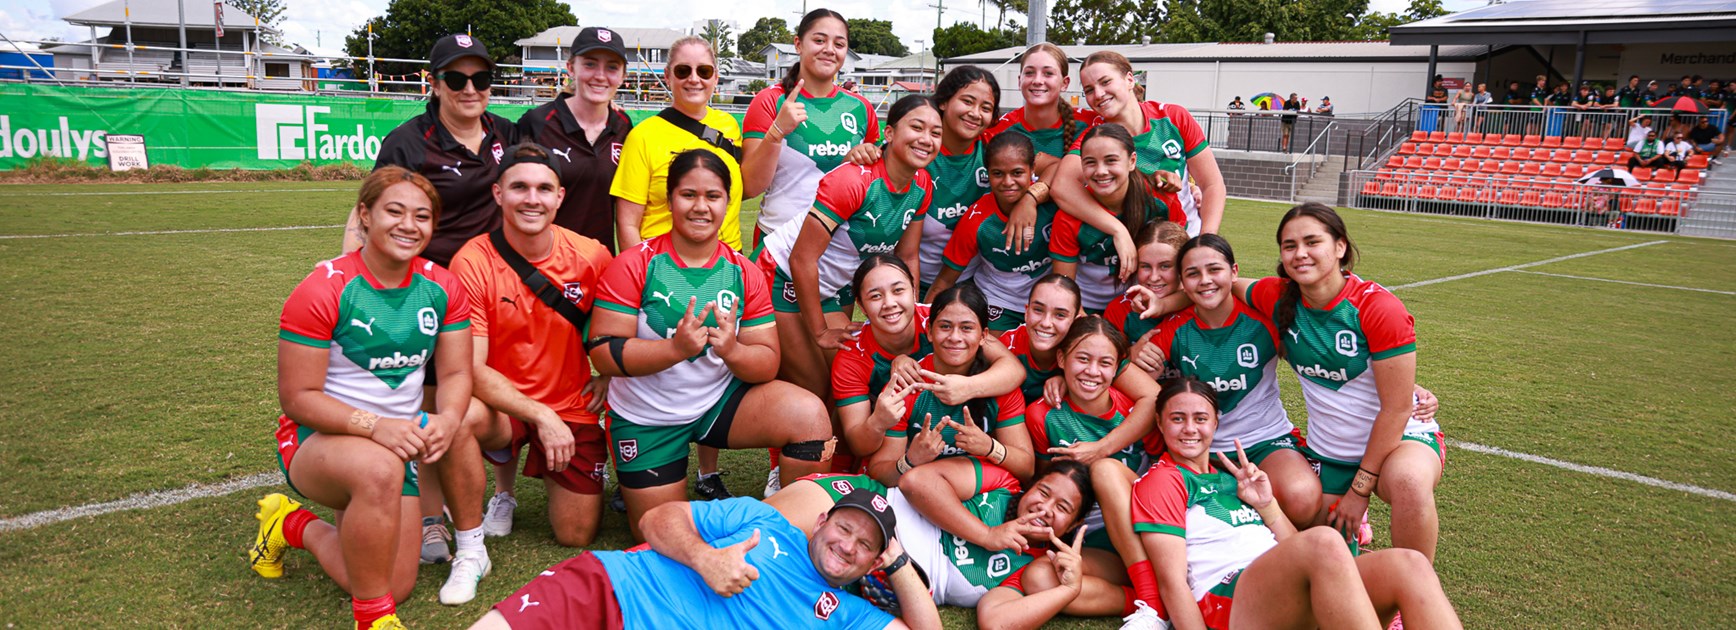 Clinical City dominate in win over Country girls